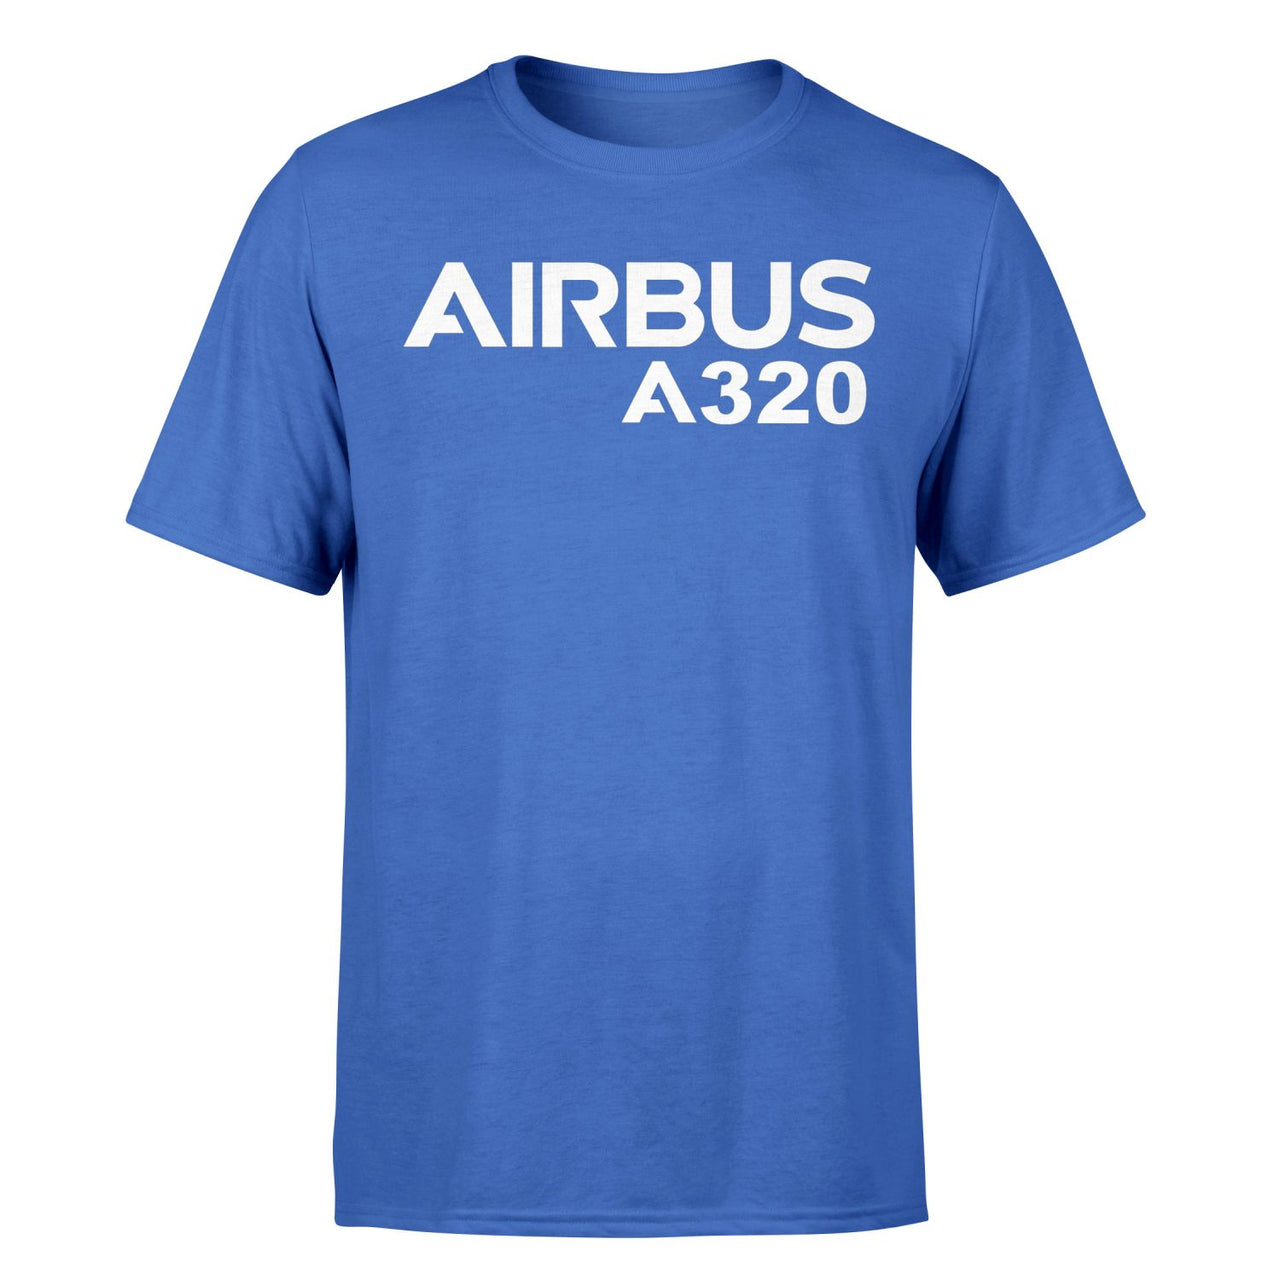 Airbus A320 & Text Designed T-Shirts